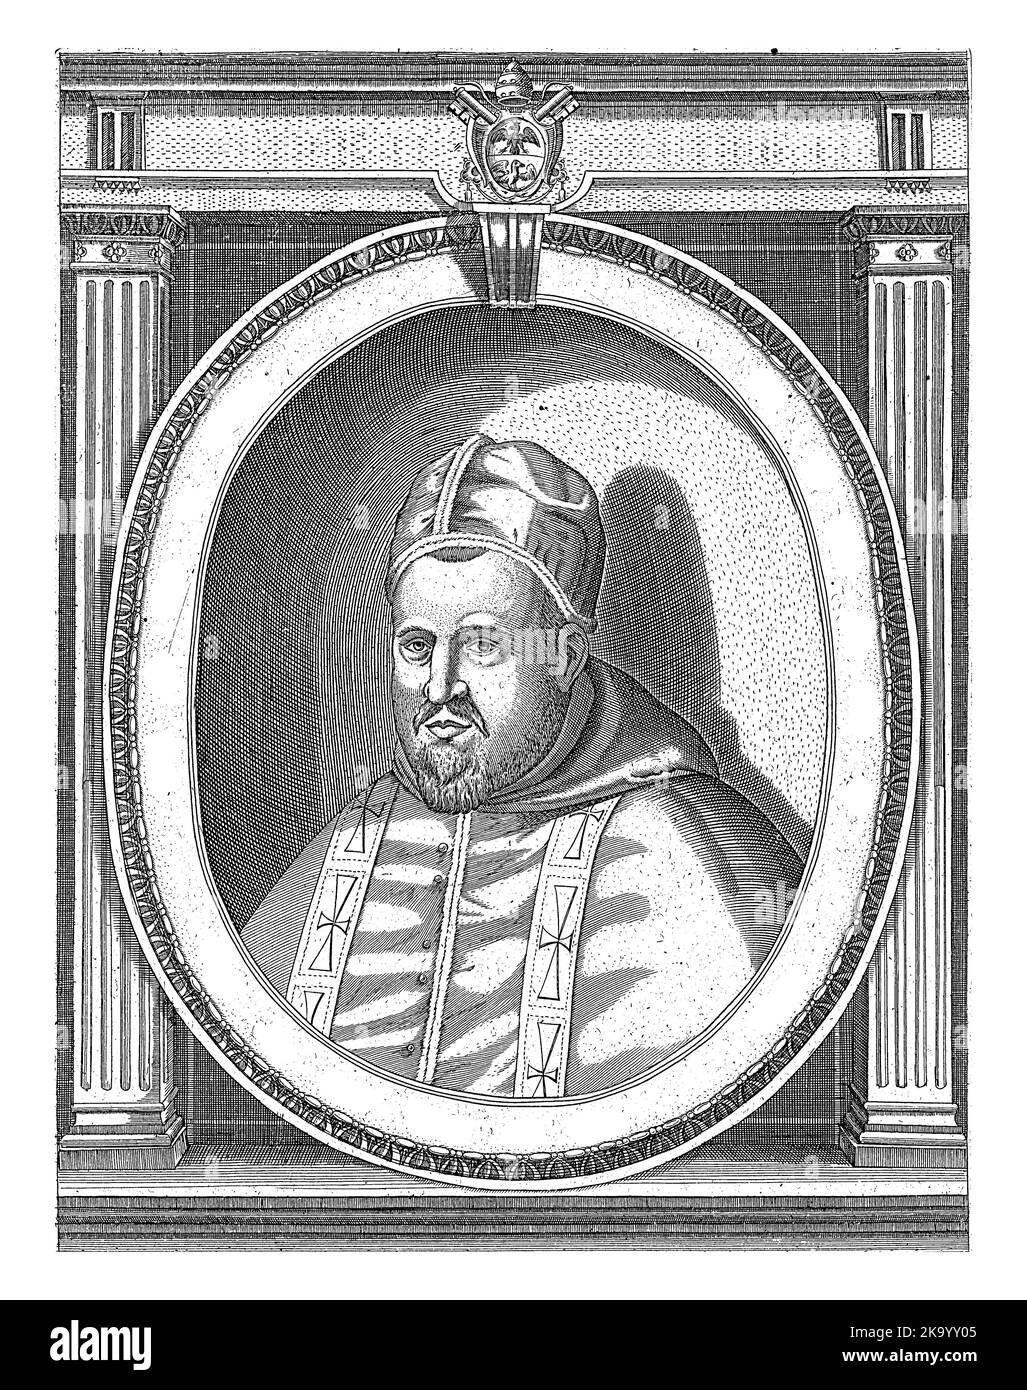 Portrait of Pope Paul V dressed in the papal robes, head with a camauro. Bust to the left in an oval frame with edge lettering. Stock Photo